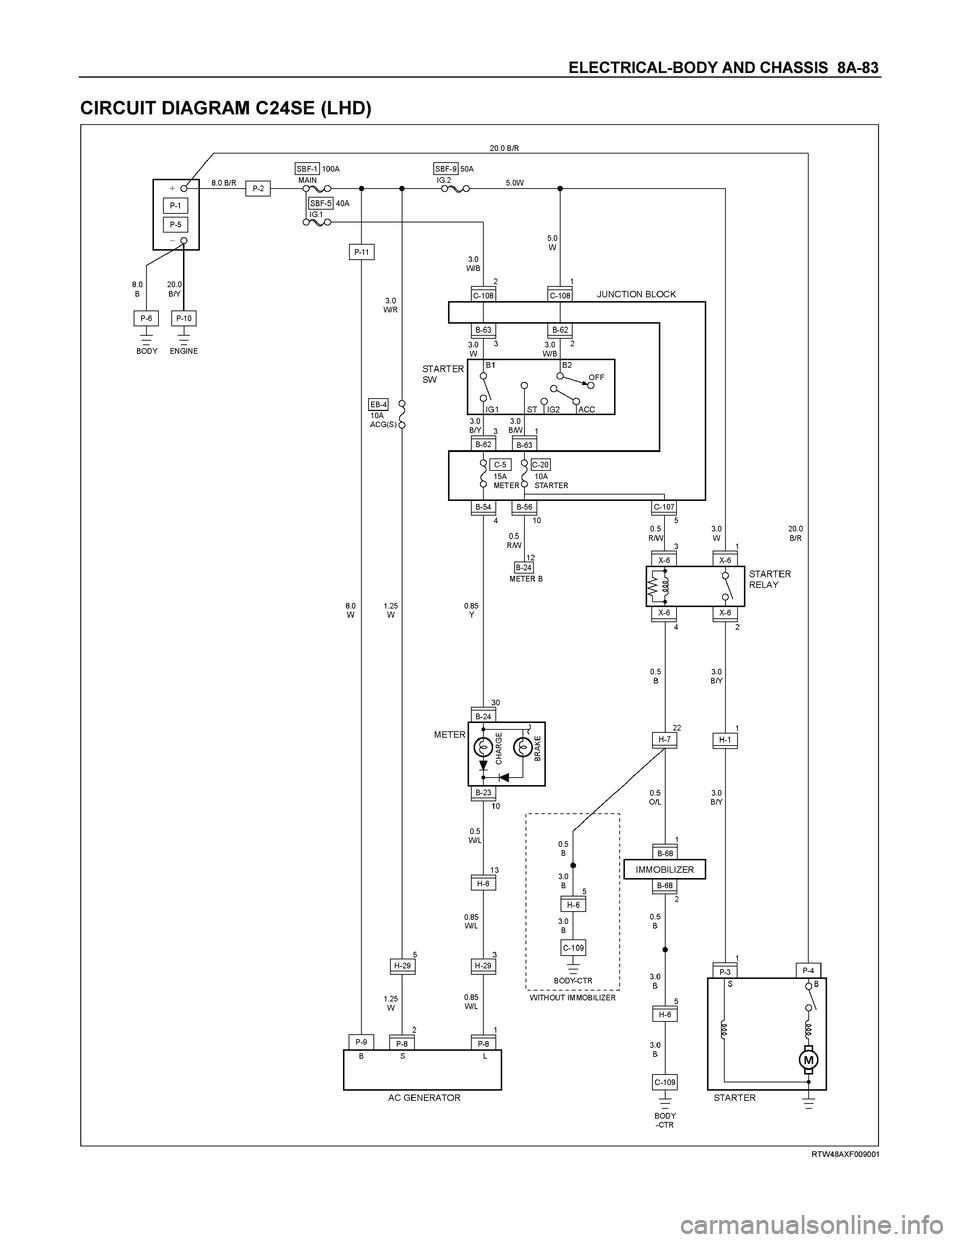 ISUZU TF SERIES 2004  Workshop Manual ELECTRICAL-BODY AND CHASSIS  8A-83 
CIRCUIT DIAGRAM C24SE (LHD) 
  
 
 
RTW48AXF009001 
  